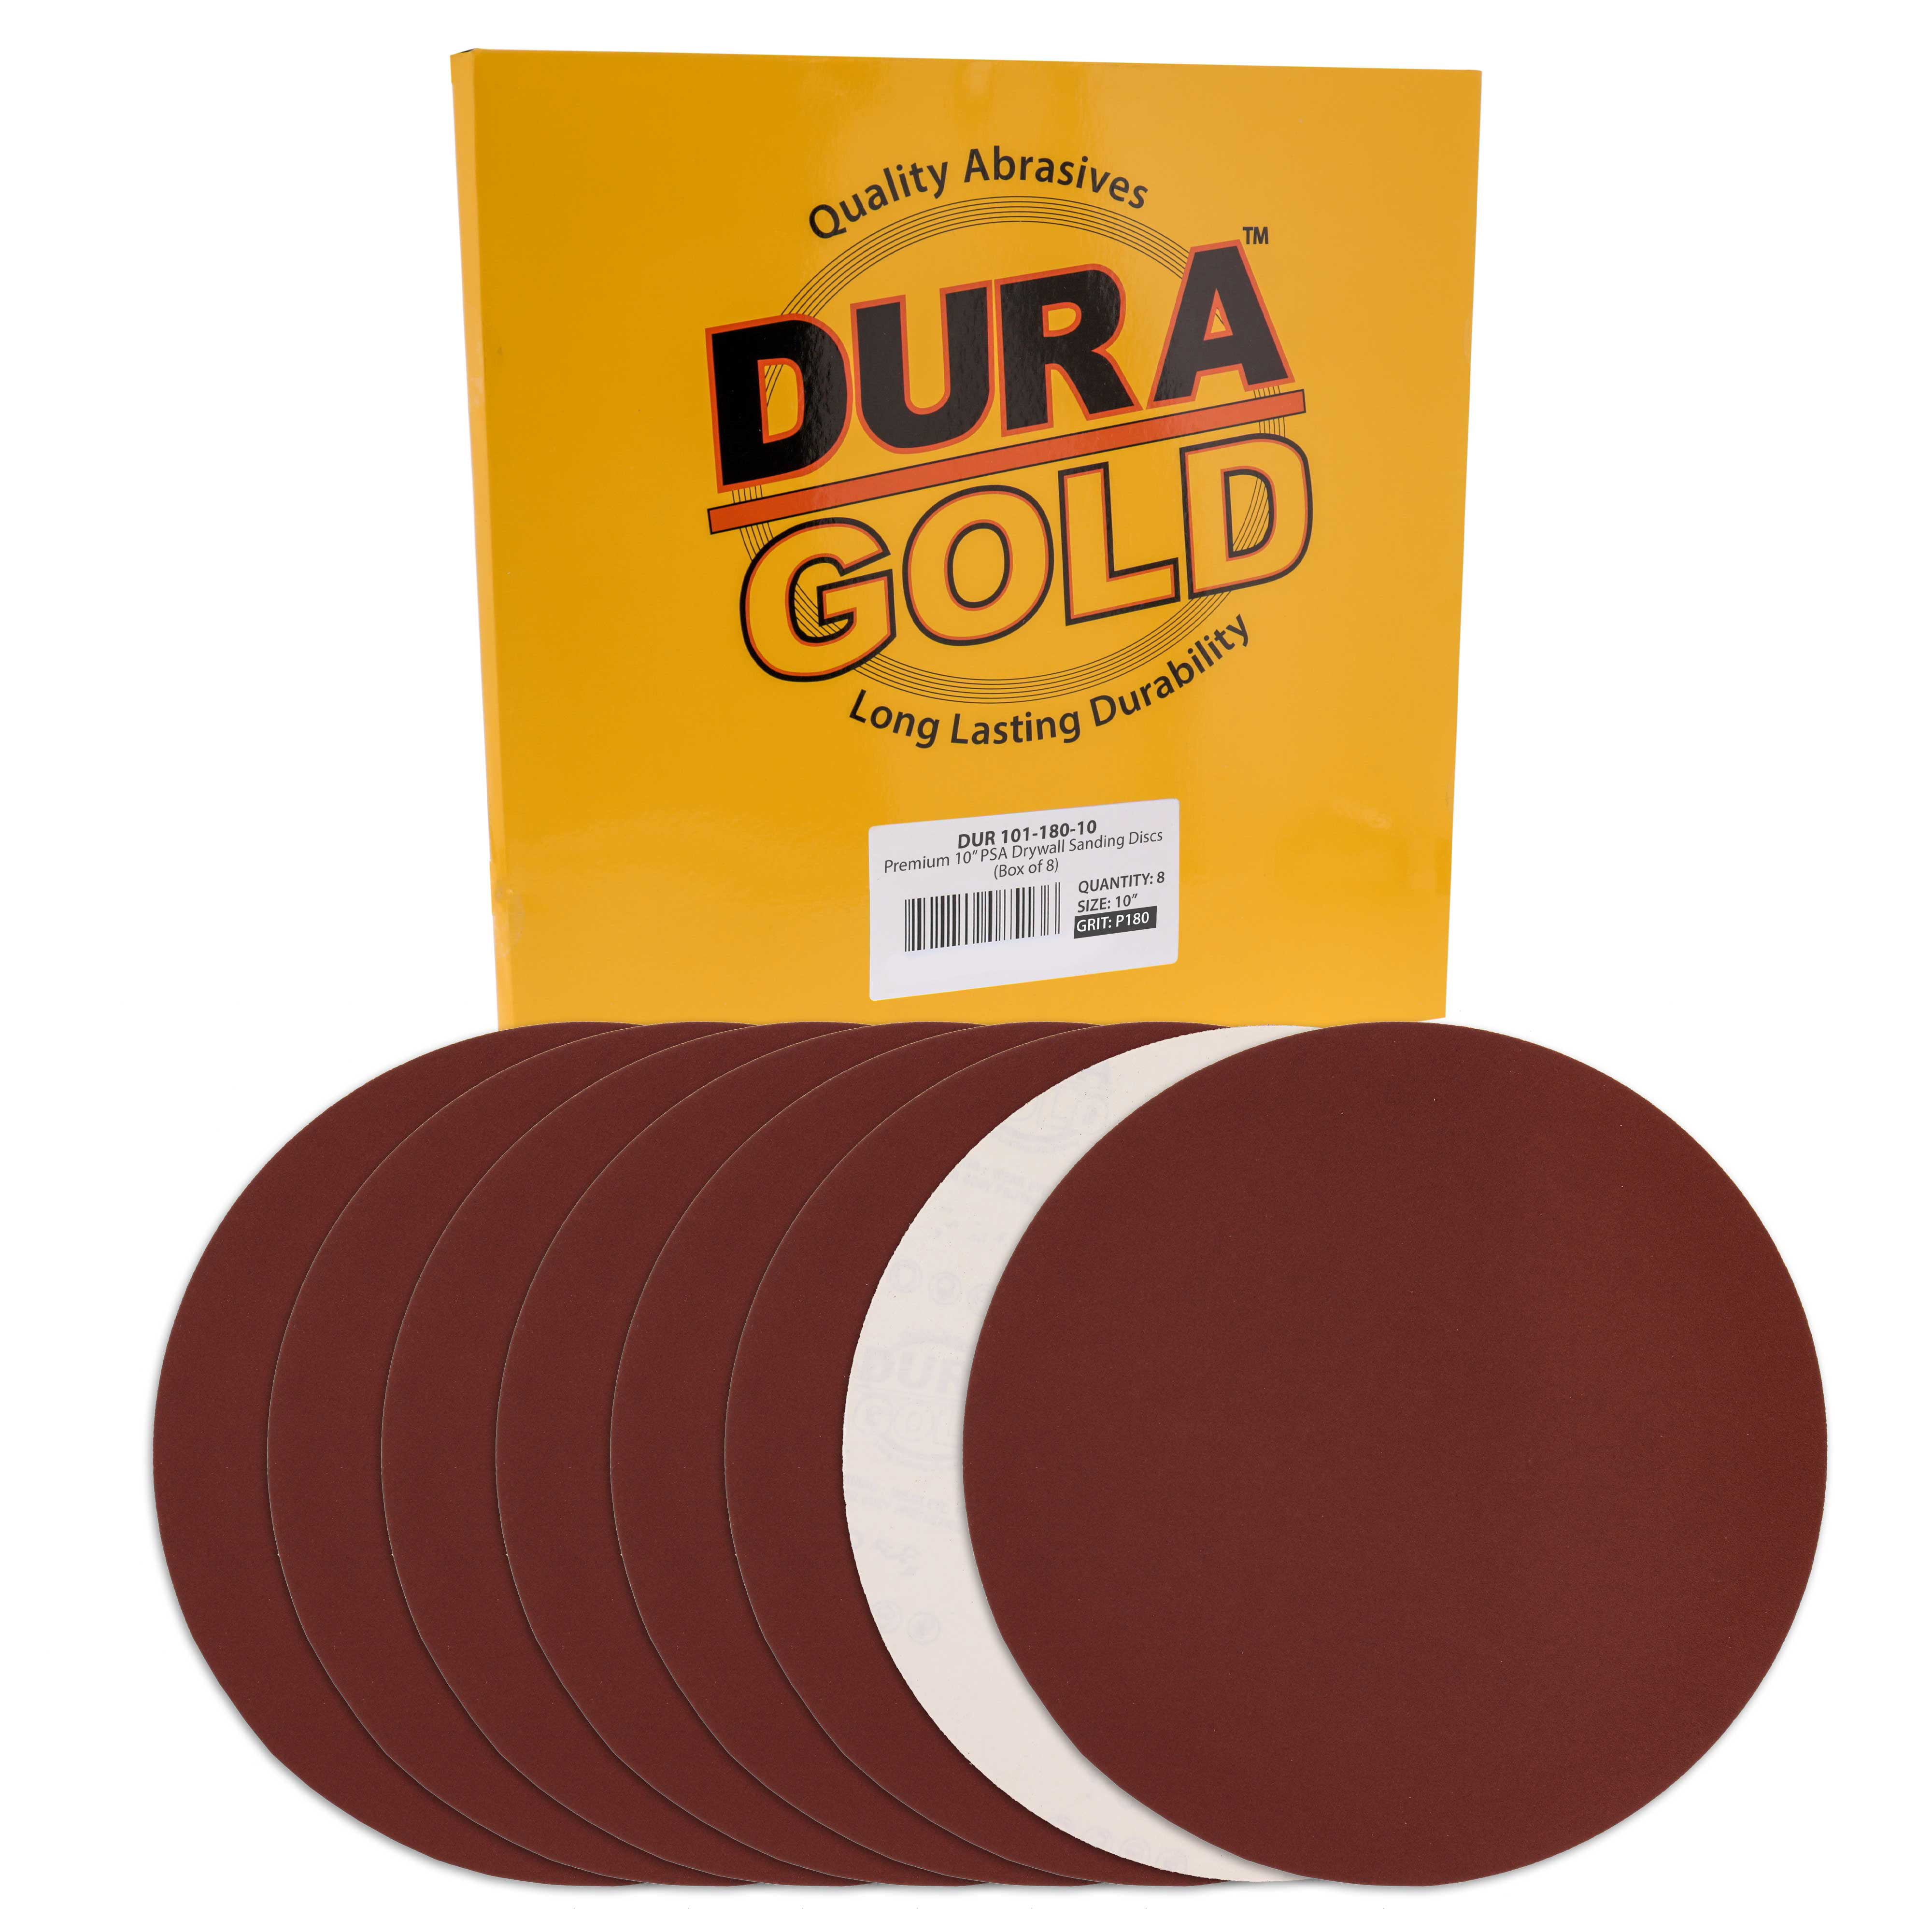 Premium Dura-Gold Box of 25 Sandpaper Finishing Discs for Automotive and Woodworking 40 Grit 6 Gold PSA Self Adhesive Stickyback Sanding Discs for DA Sanders 